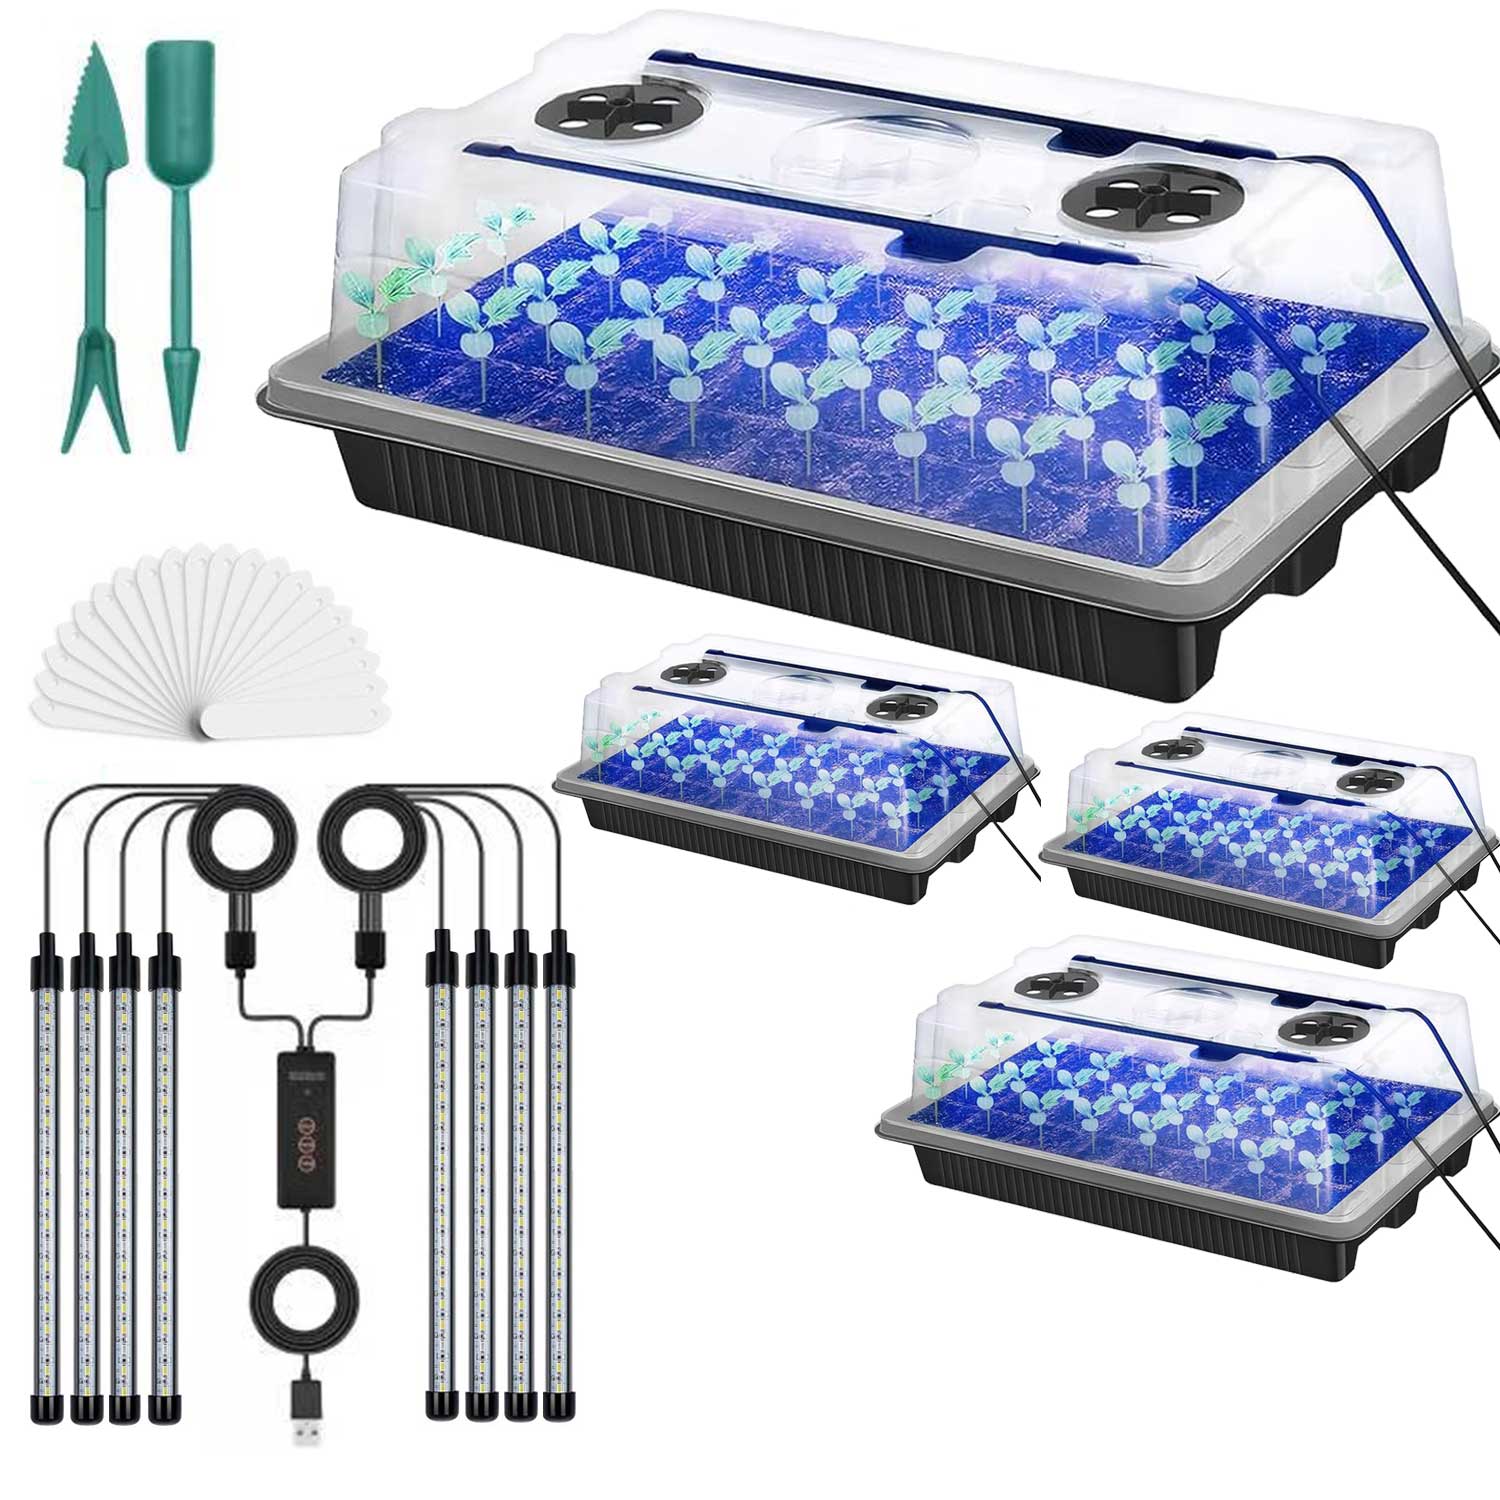 4 Packs 160 Cells Seed Starter Tray with Grow Light High Dome Seed Germination Kit  with 8 LED Grow Lights Seedling Starter Kit with Smart Timer White&Blue Fullspectrum Growth Light